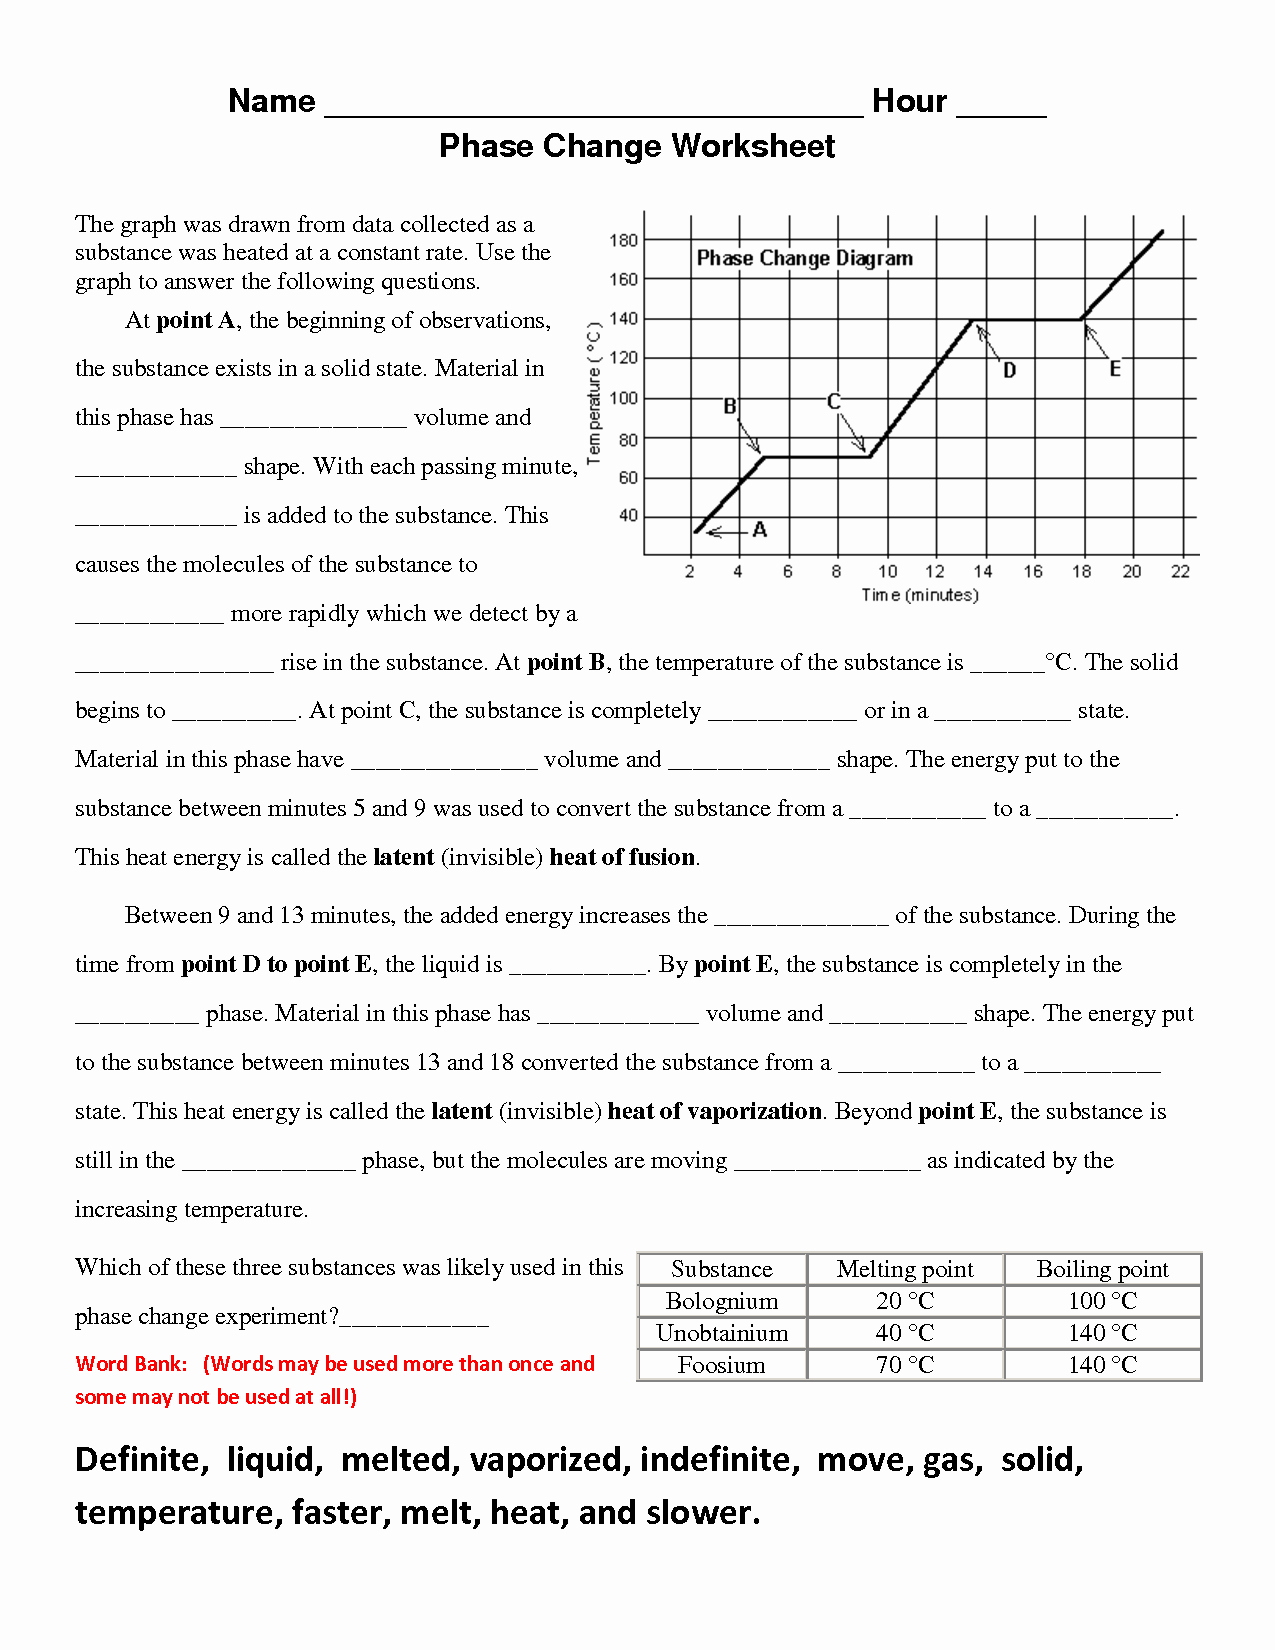 Moon Phases Worksheet Answers Best Of 9 Best Of Moon Phases Worksheet Answer Key Moon